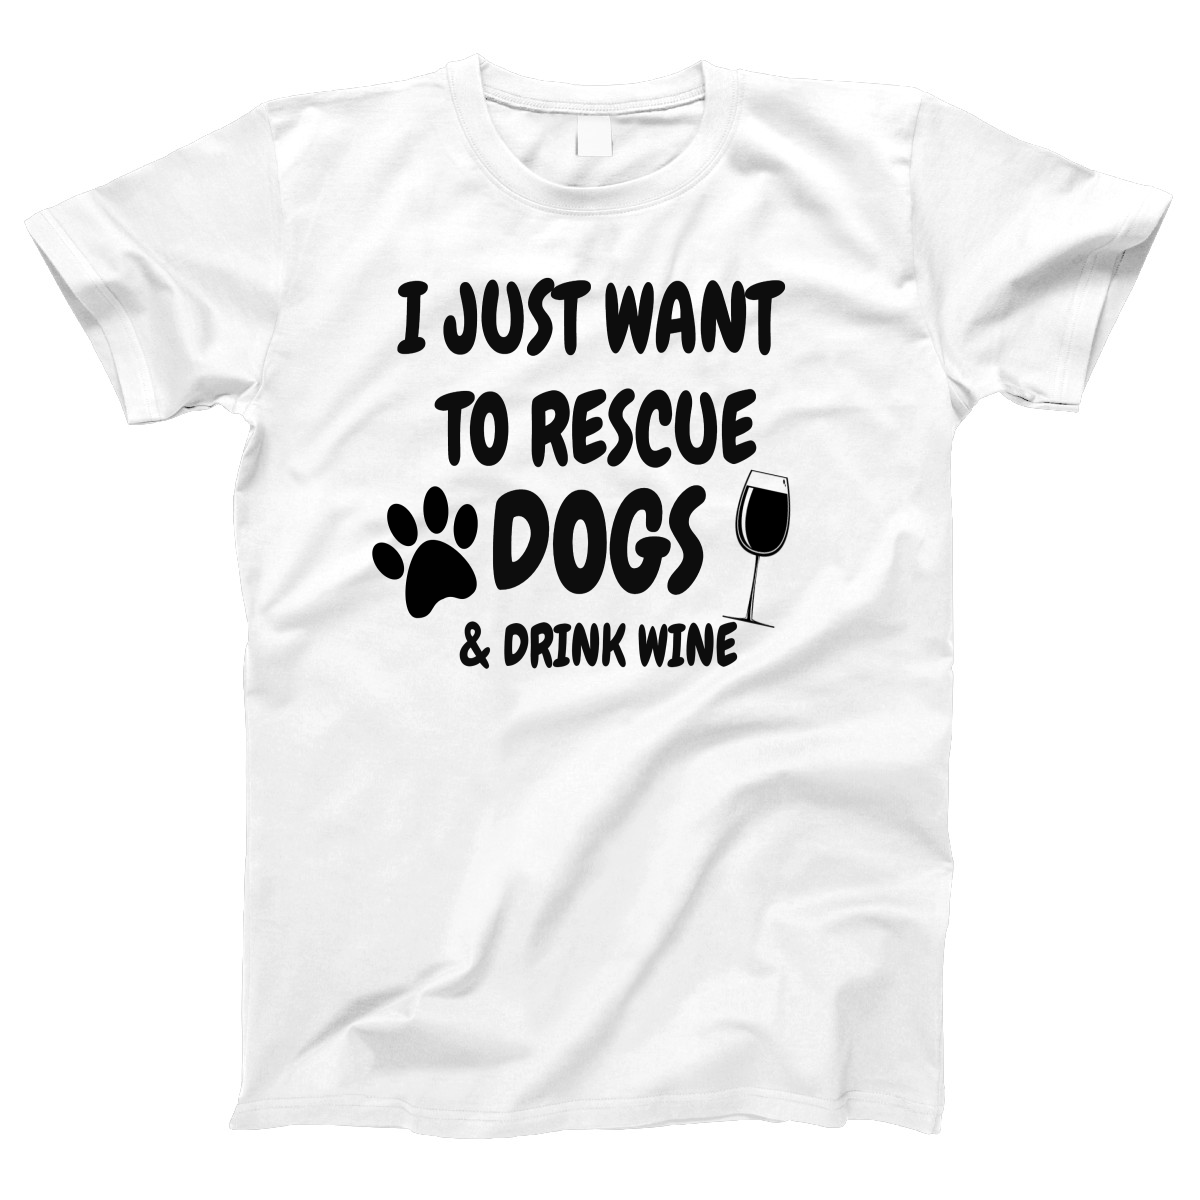 Dogs and Drink Wine Women's T-shirt | White